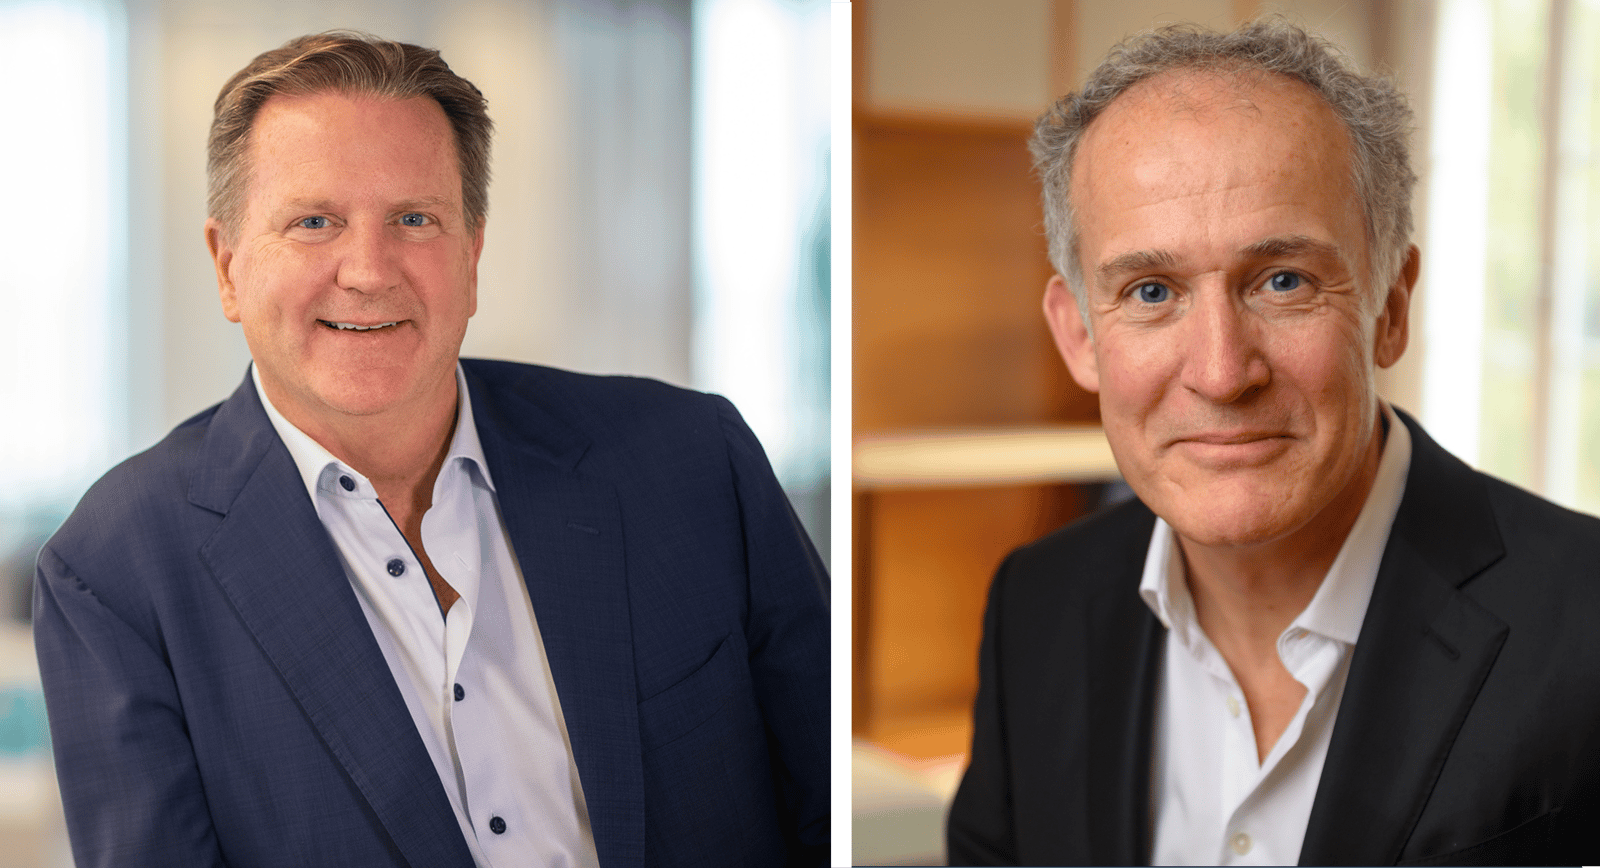 Justin Tydeman assumes the position of Unispace Group CEO, while Steve Quick transitions to the role of Board Advisor.